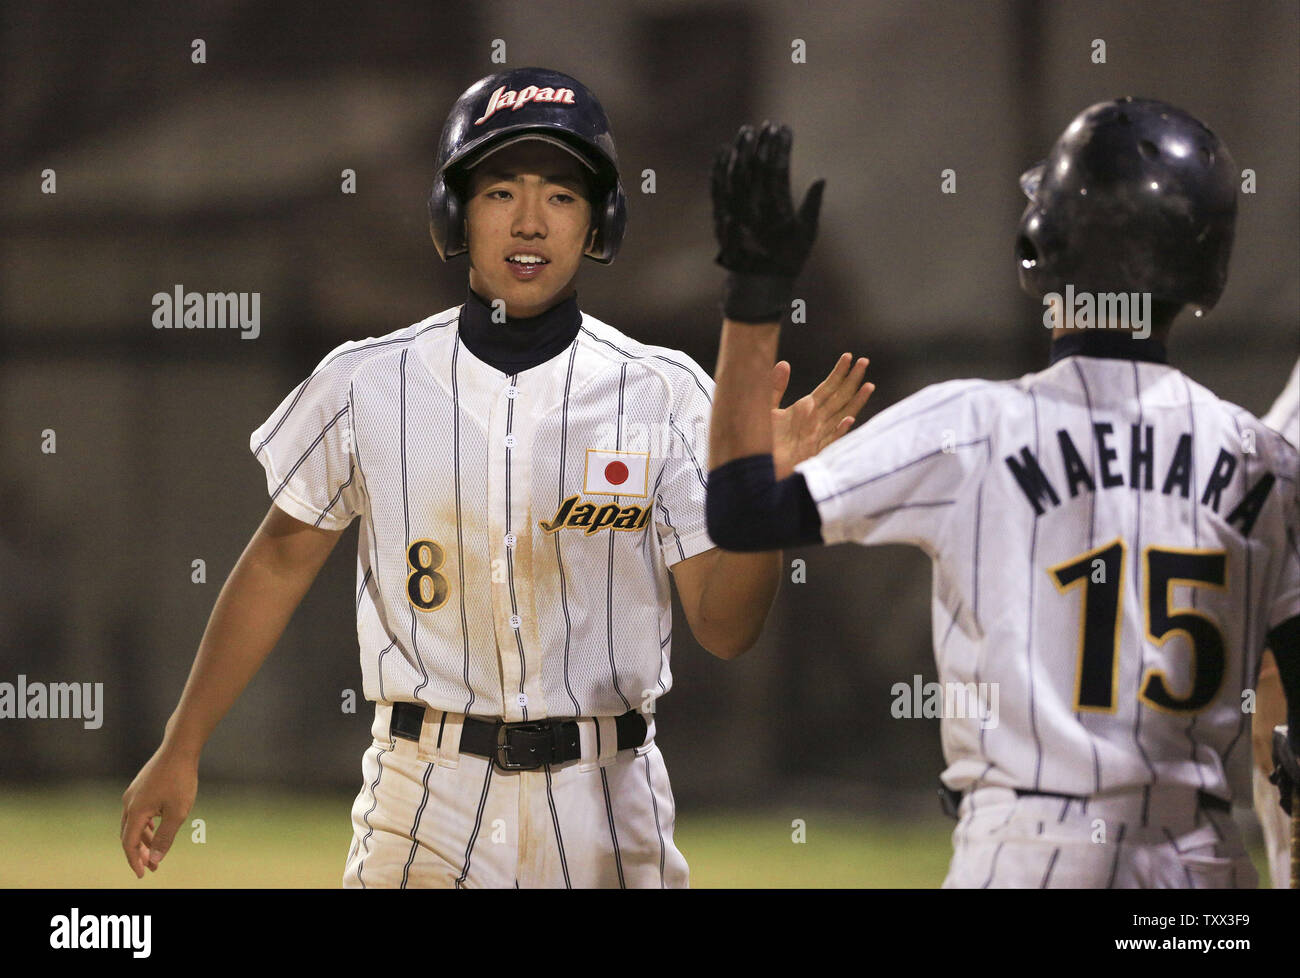 Japan's Kosei Katayama (L) is greeted by Kento Maehara after scoring in the fourth inning of their championship game against Los Lomas Potros during the McHenry County Youth Sports Association's 23rd annual 15-Year-Old International Baseball Tournament on August 1, 2015 in Crystal Lake, Illinois.  Japan defeated Los Lomas Potros 3-2. Photo by John Konstantaras/UPI Stock Photo